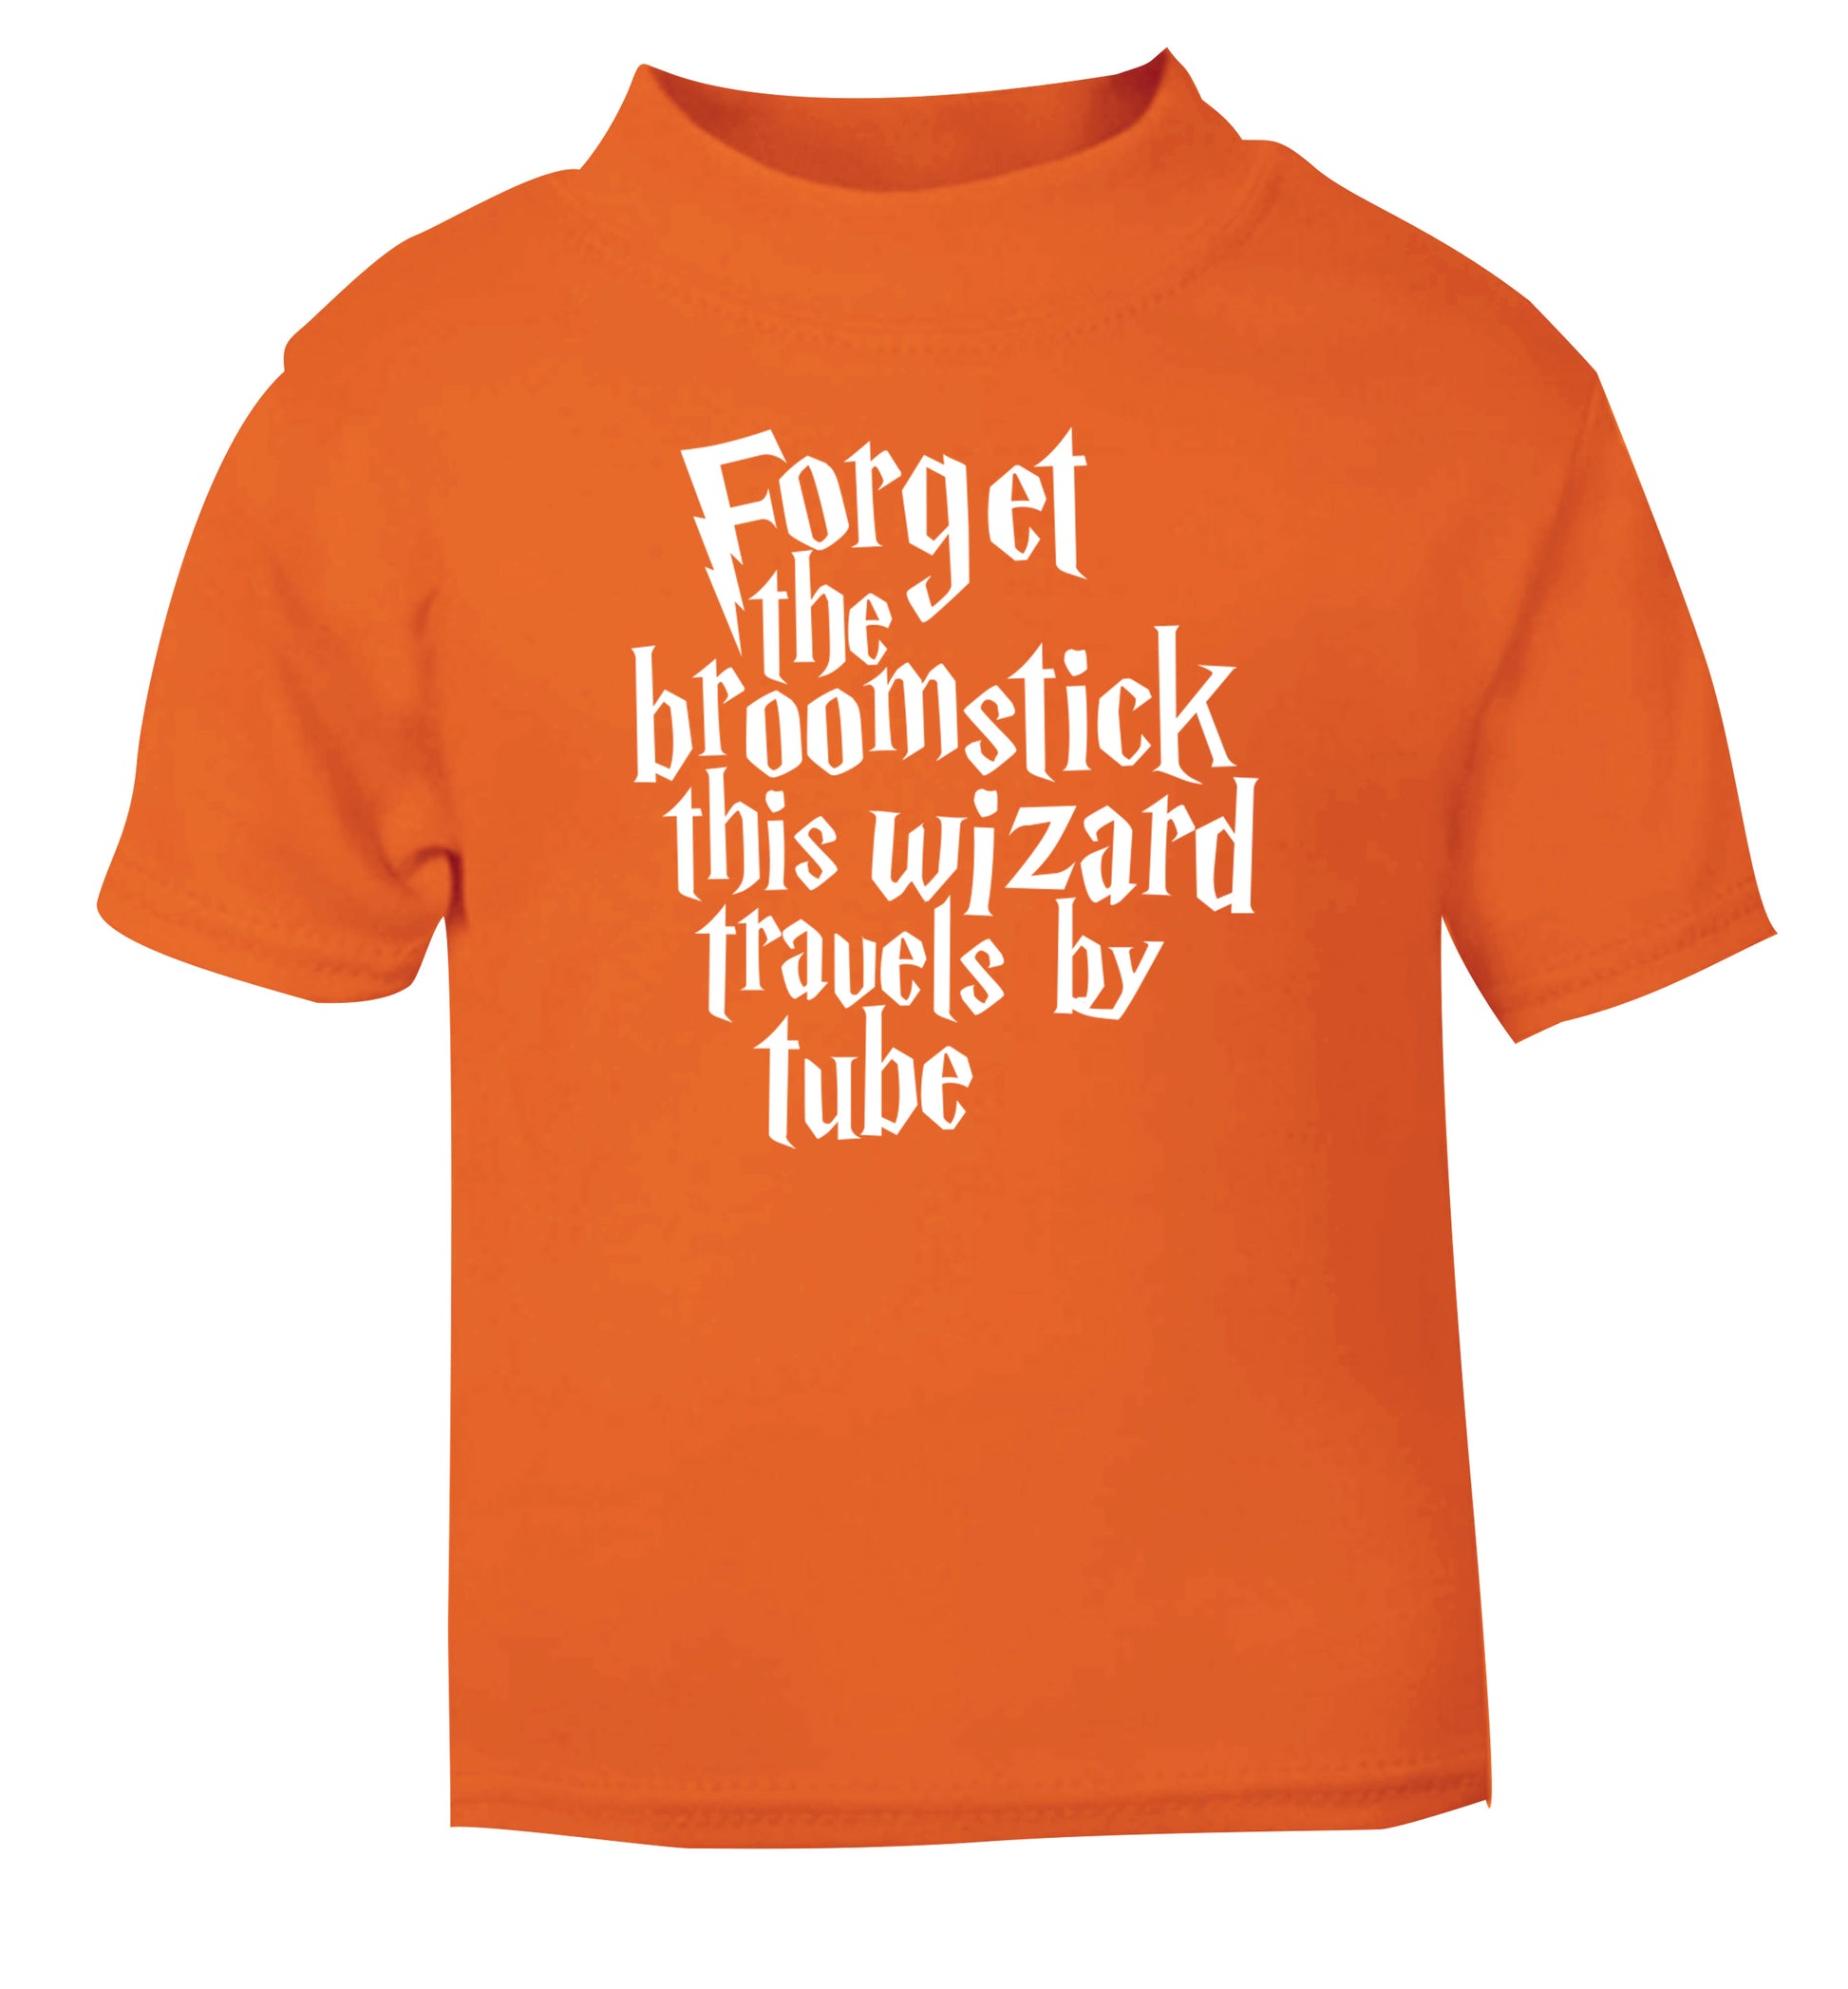 Forget the broomstick this wizard travels by tube orange Baby Toddler Tshirt 2 Years